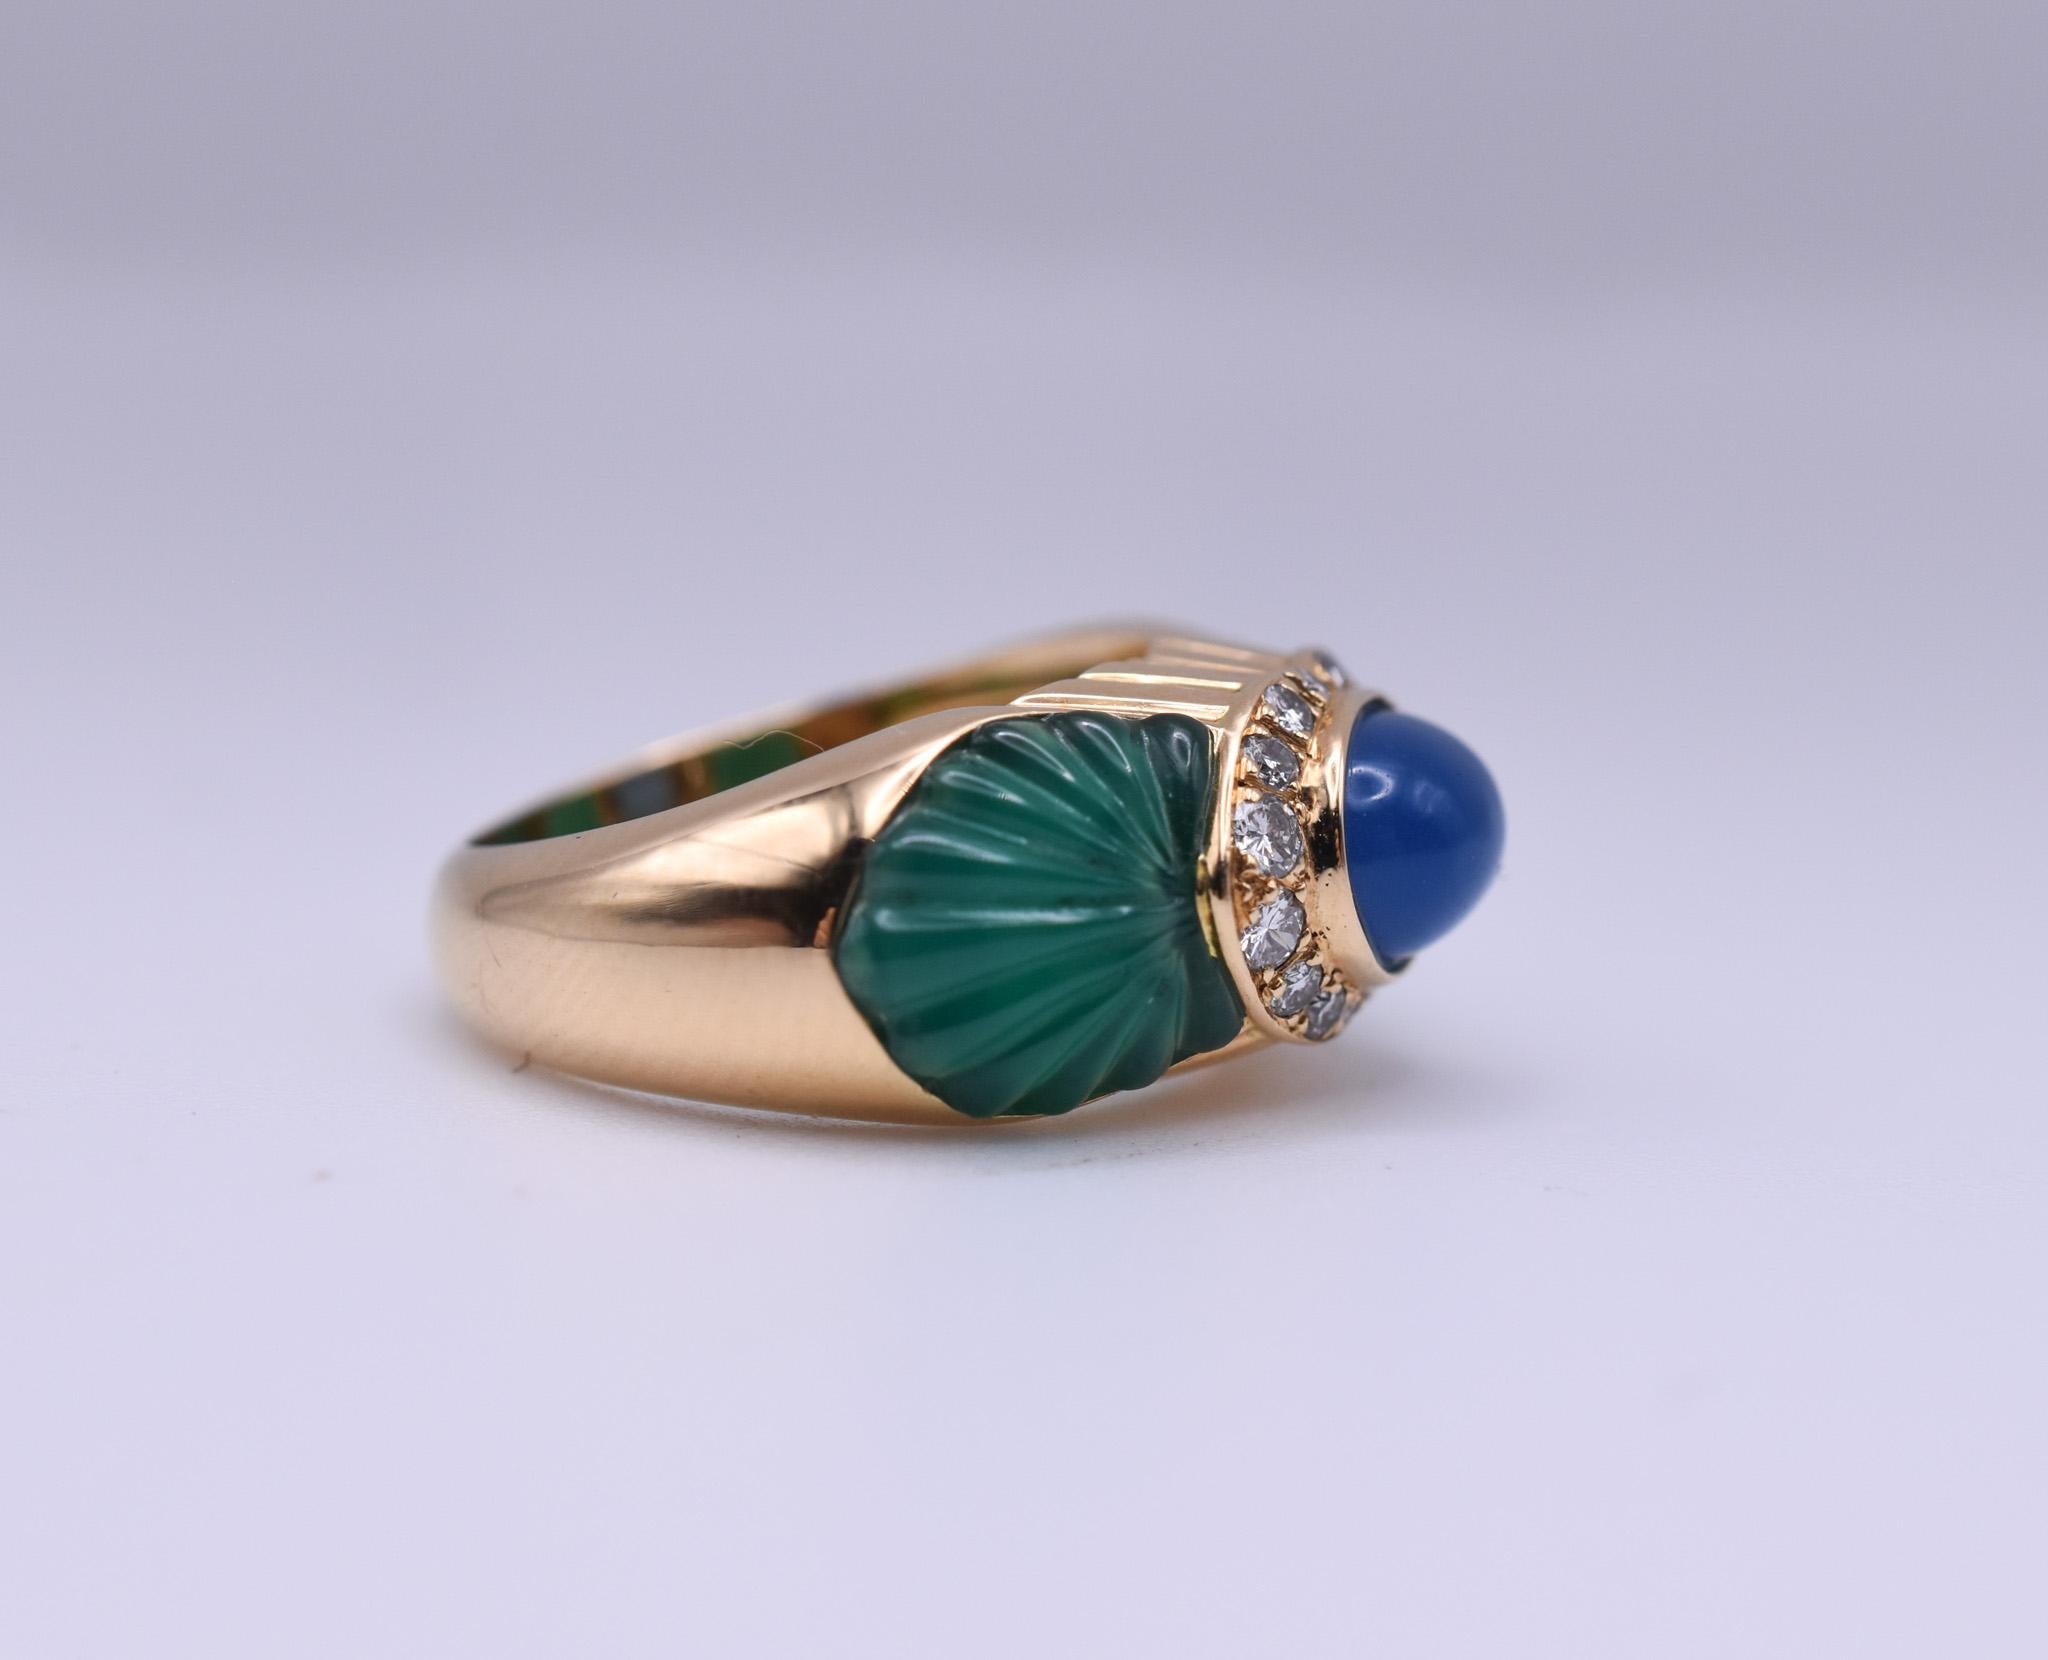 Cabochon Vintage Cartier 18k Gold Sapphire, Chrysoprase and Diamond Ring, c. 1980 For Sale